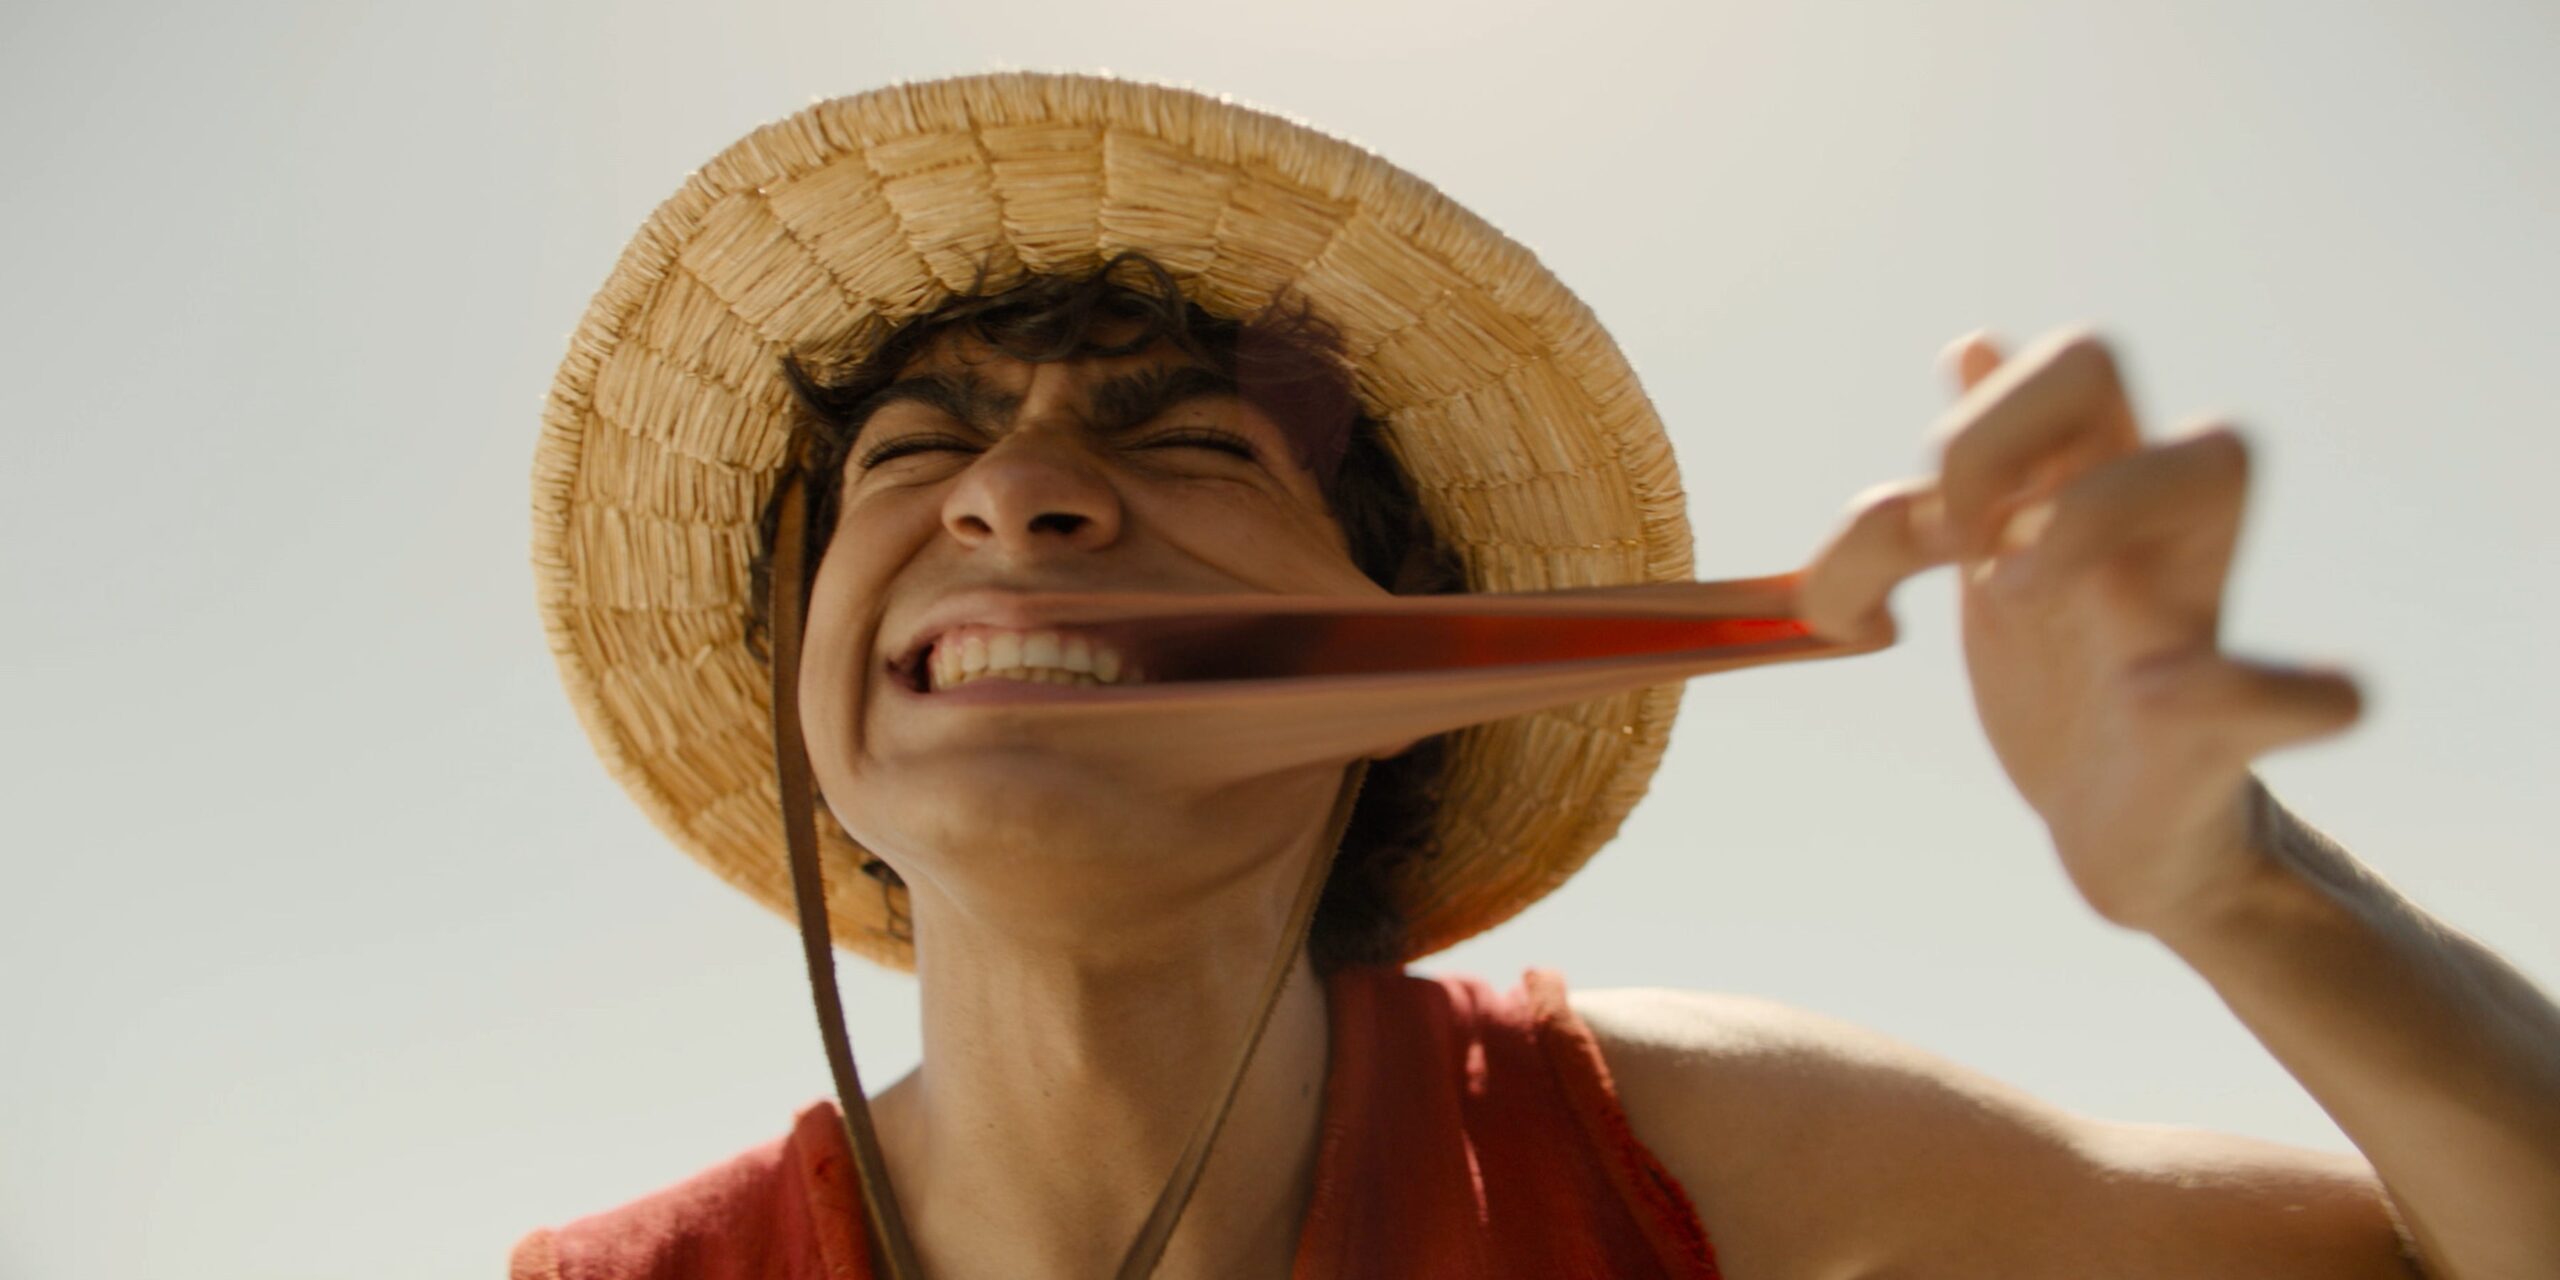 iñaki godoy as luffy in netflix's one piece. he's stretching out his cheek, demonstrating that he can stretch like rubber, and grinning widely